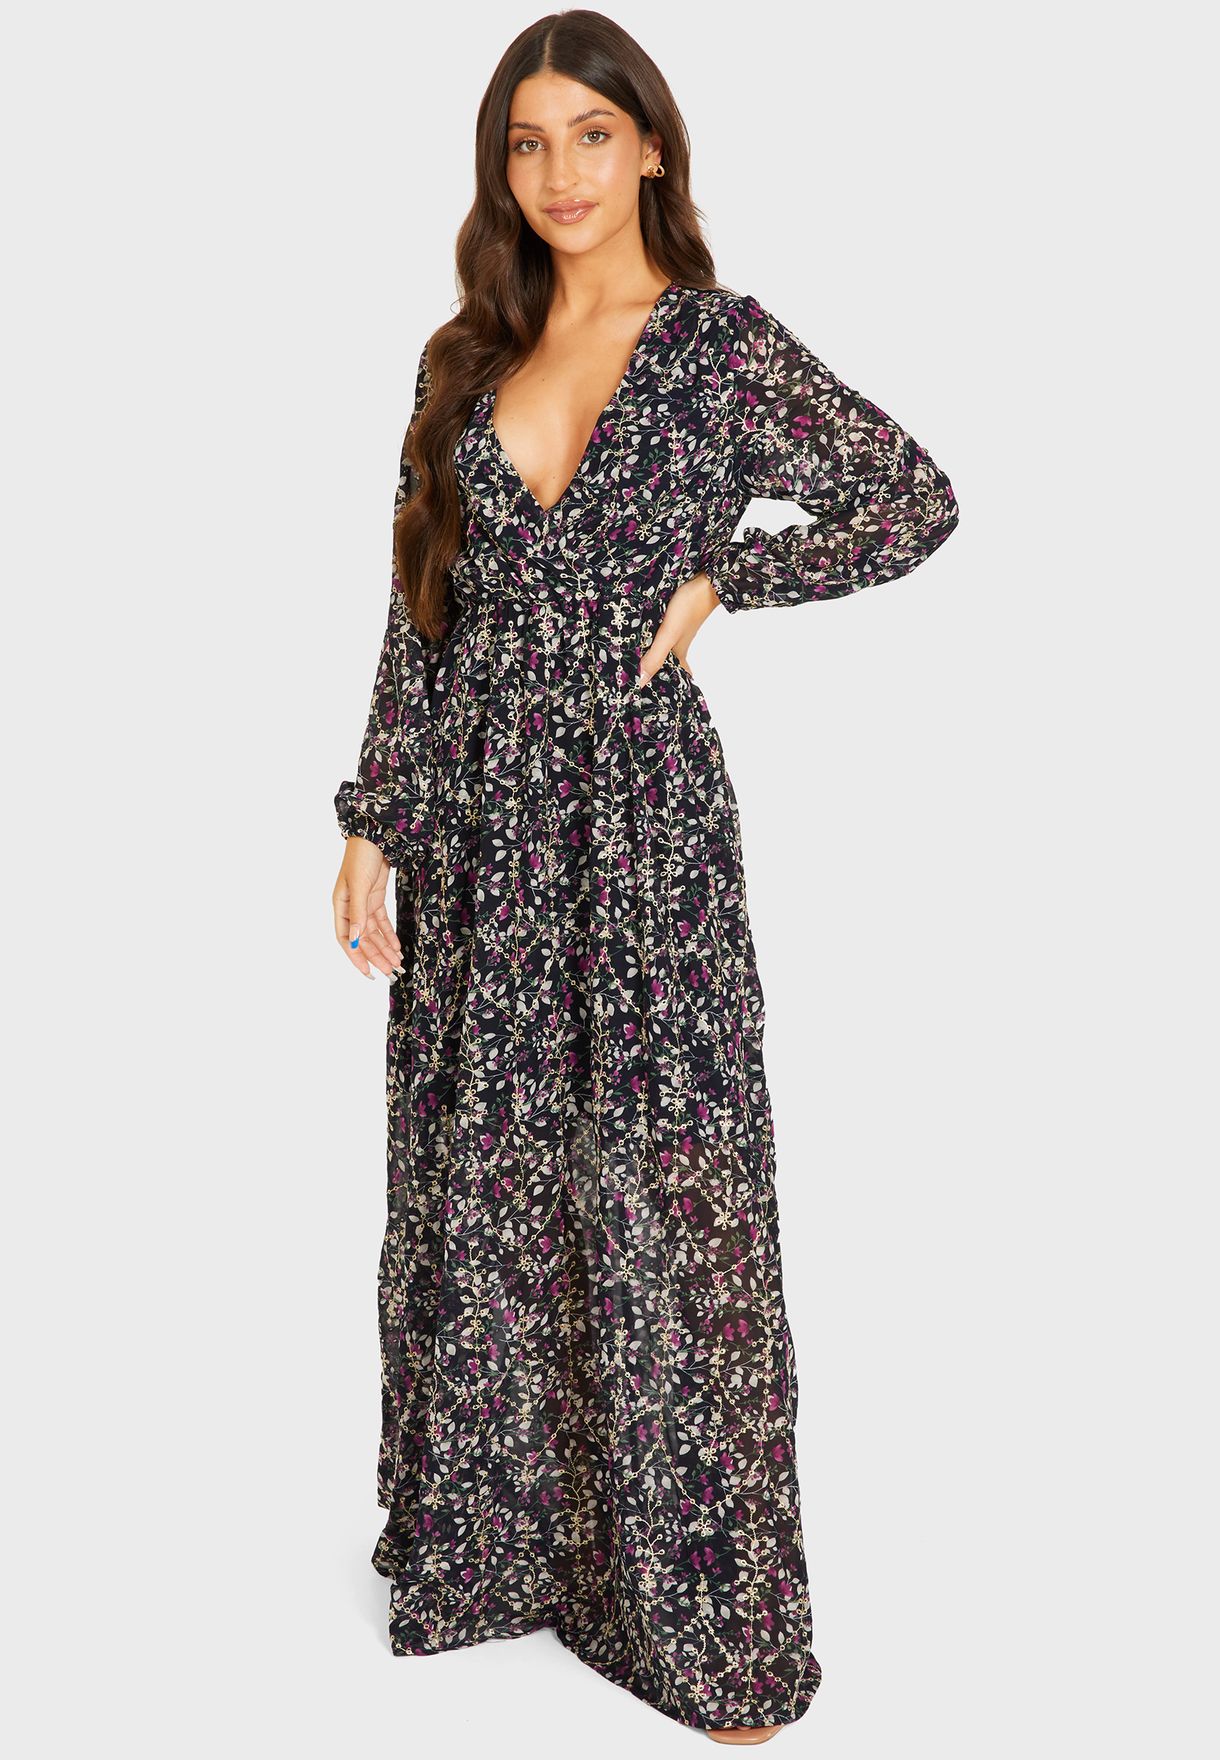 Buy Quiz prints Wrap Embroidered Dress for Women in MENA, Worldwide